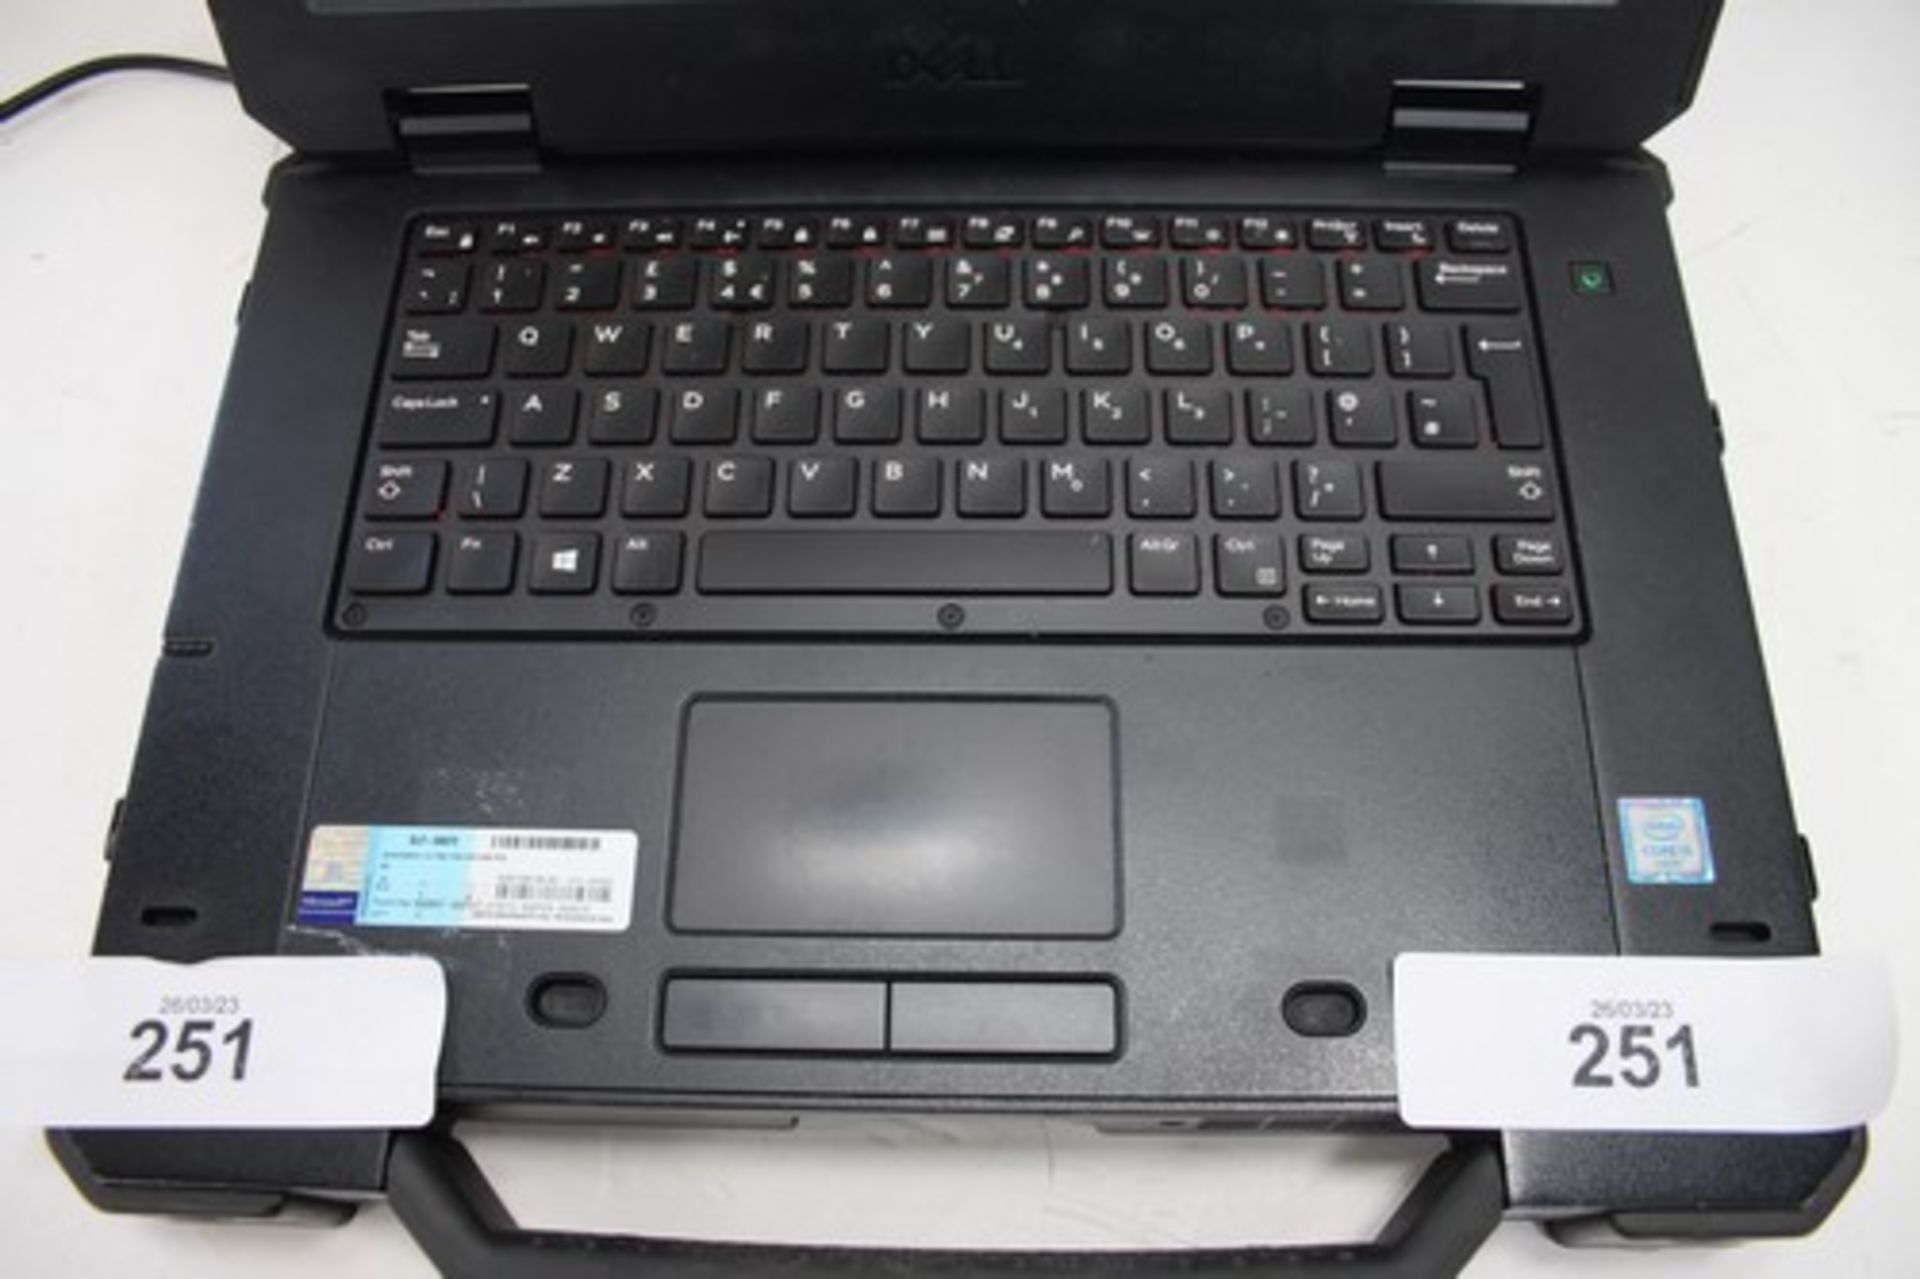 1 x Dell P45G, model: Latitude 14" rugged extreme 7414 laptop with 156300U processor, 8gb ram, - Image 2 of 7